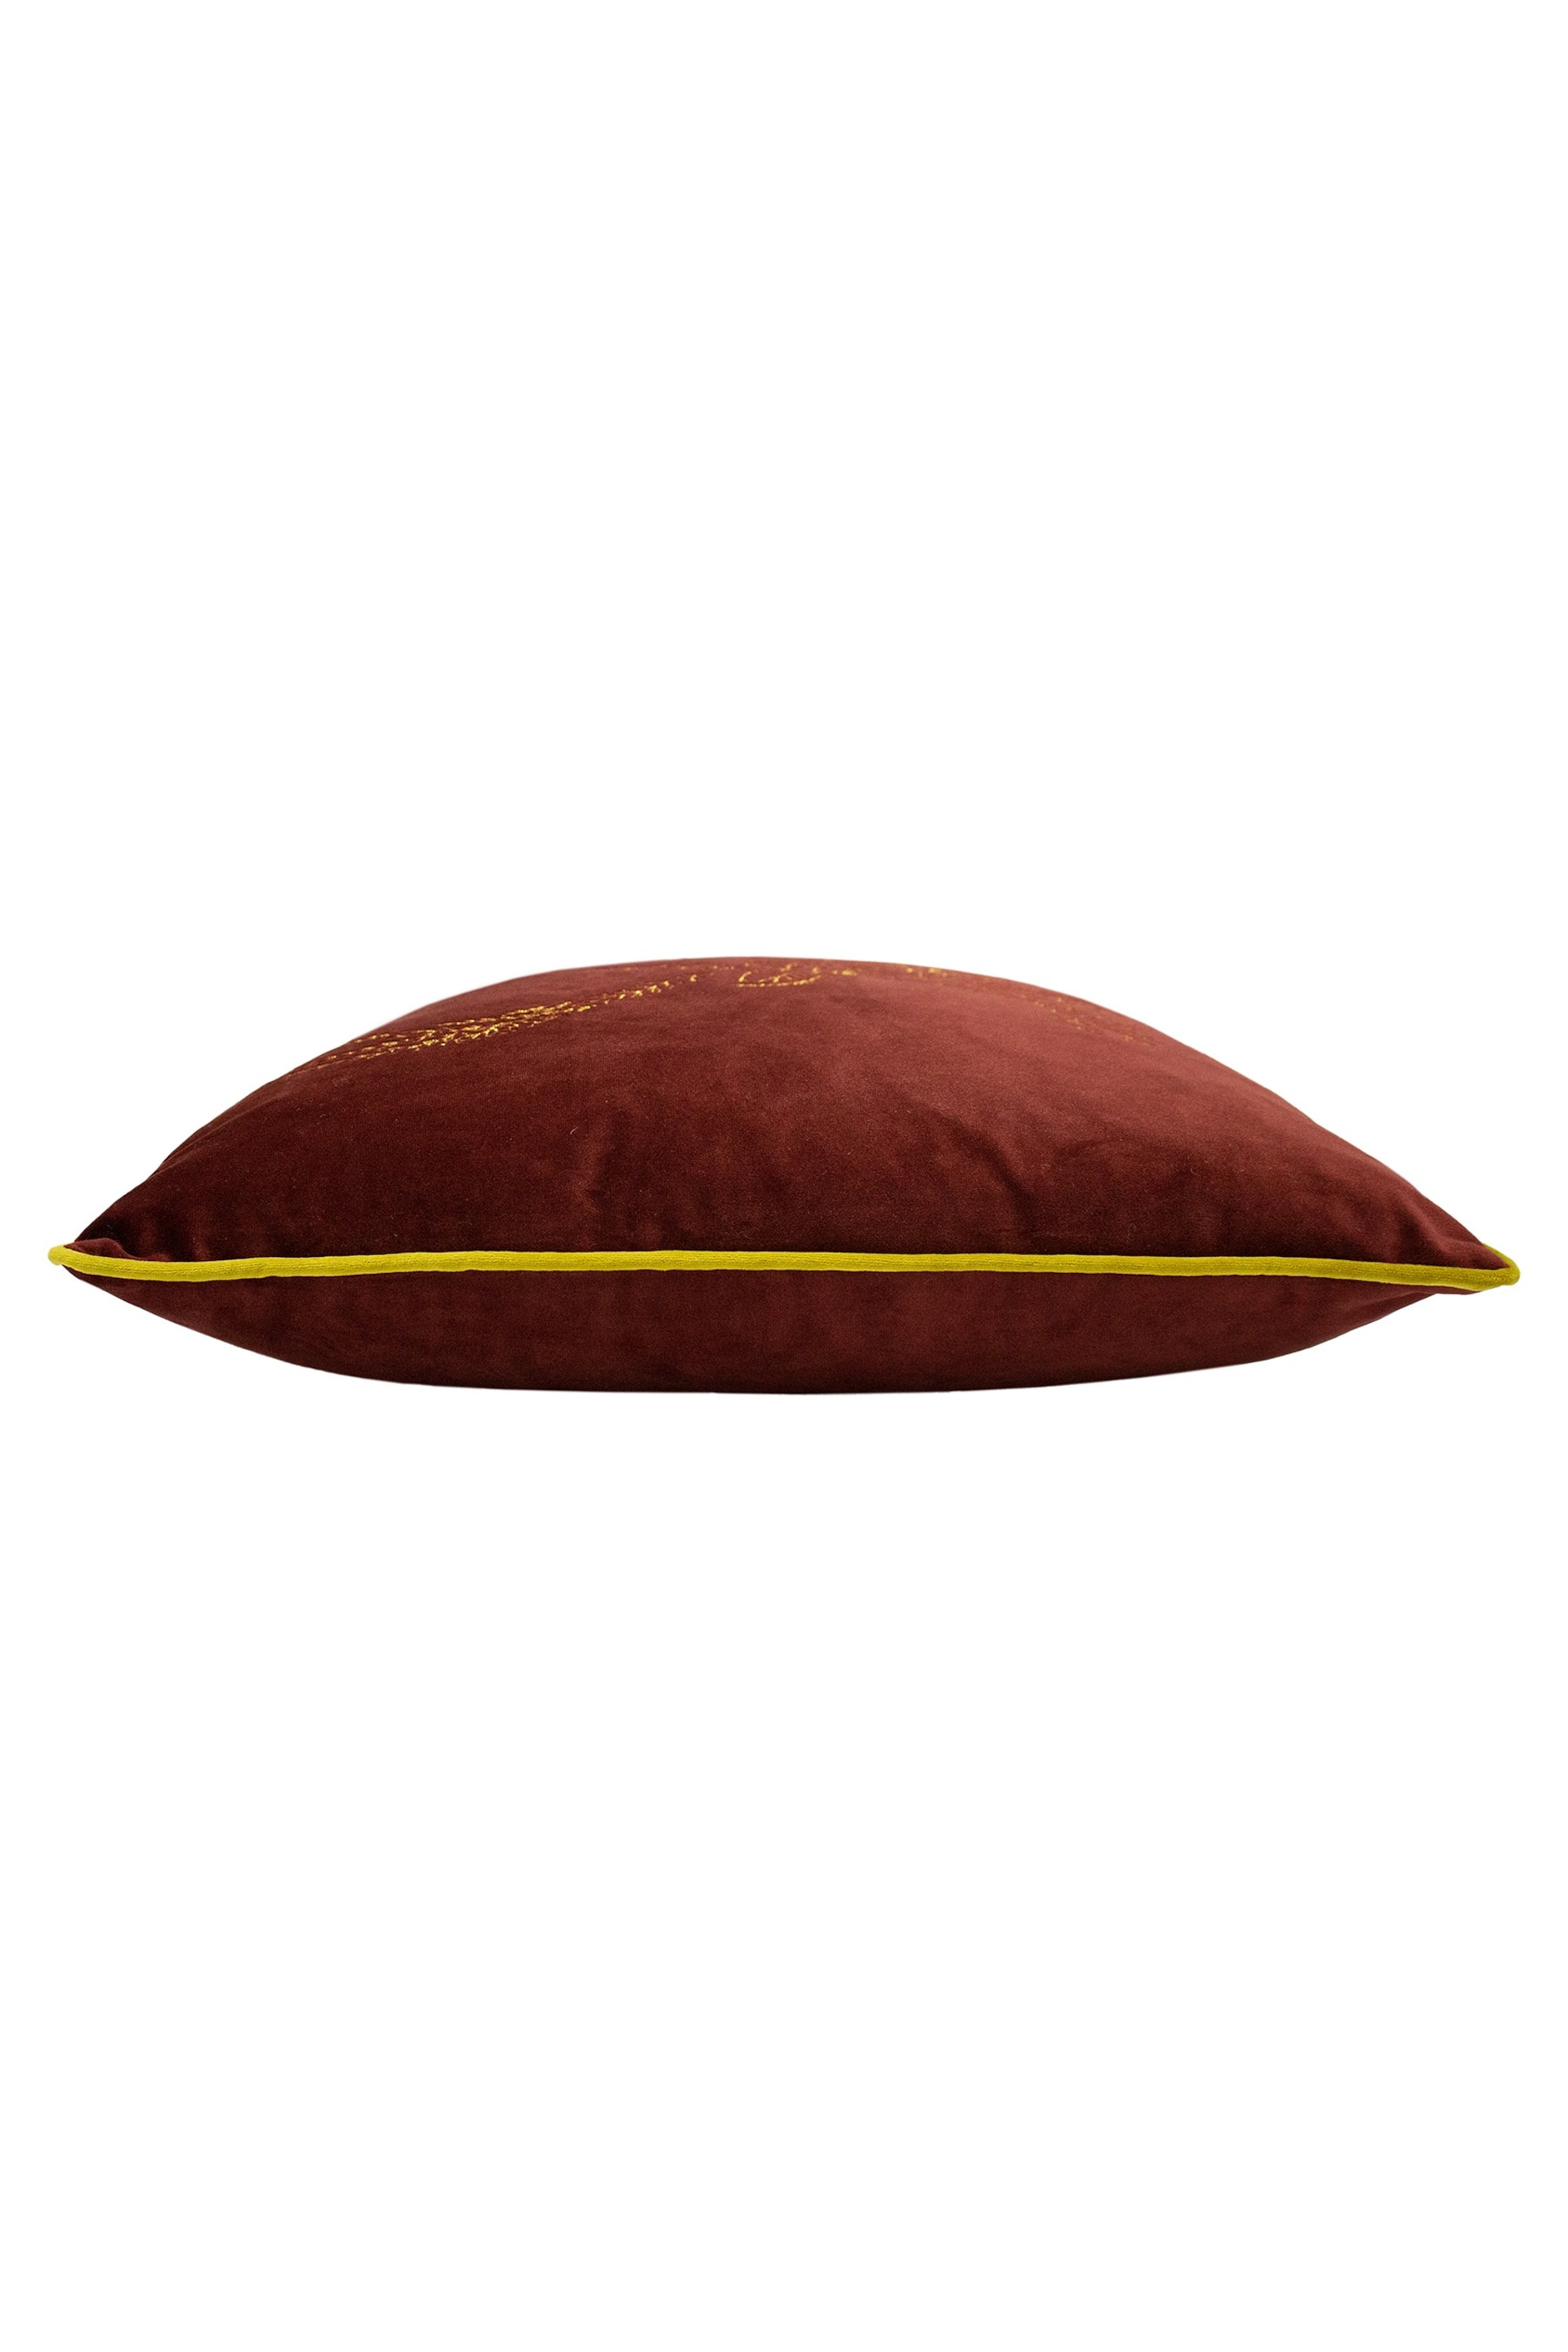 furn. Burgundy Red/Gold Forest Fauna Embroidered Polyester Filled Cushion - Image 4 of 5